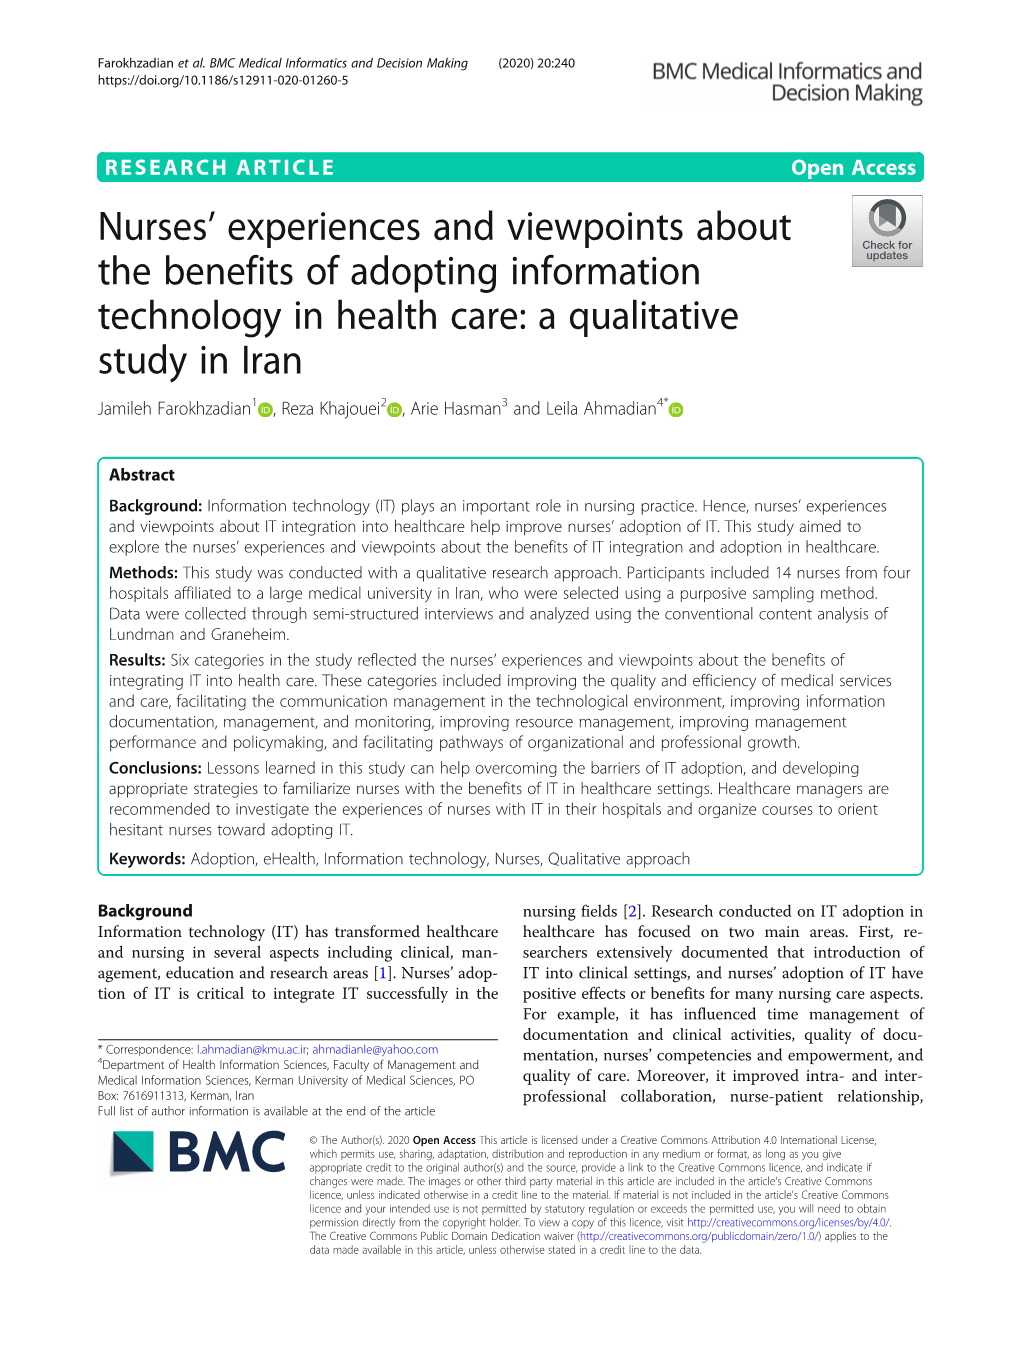 Nurses' Experiences and Viewpoints About the Benefits of Adopting